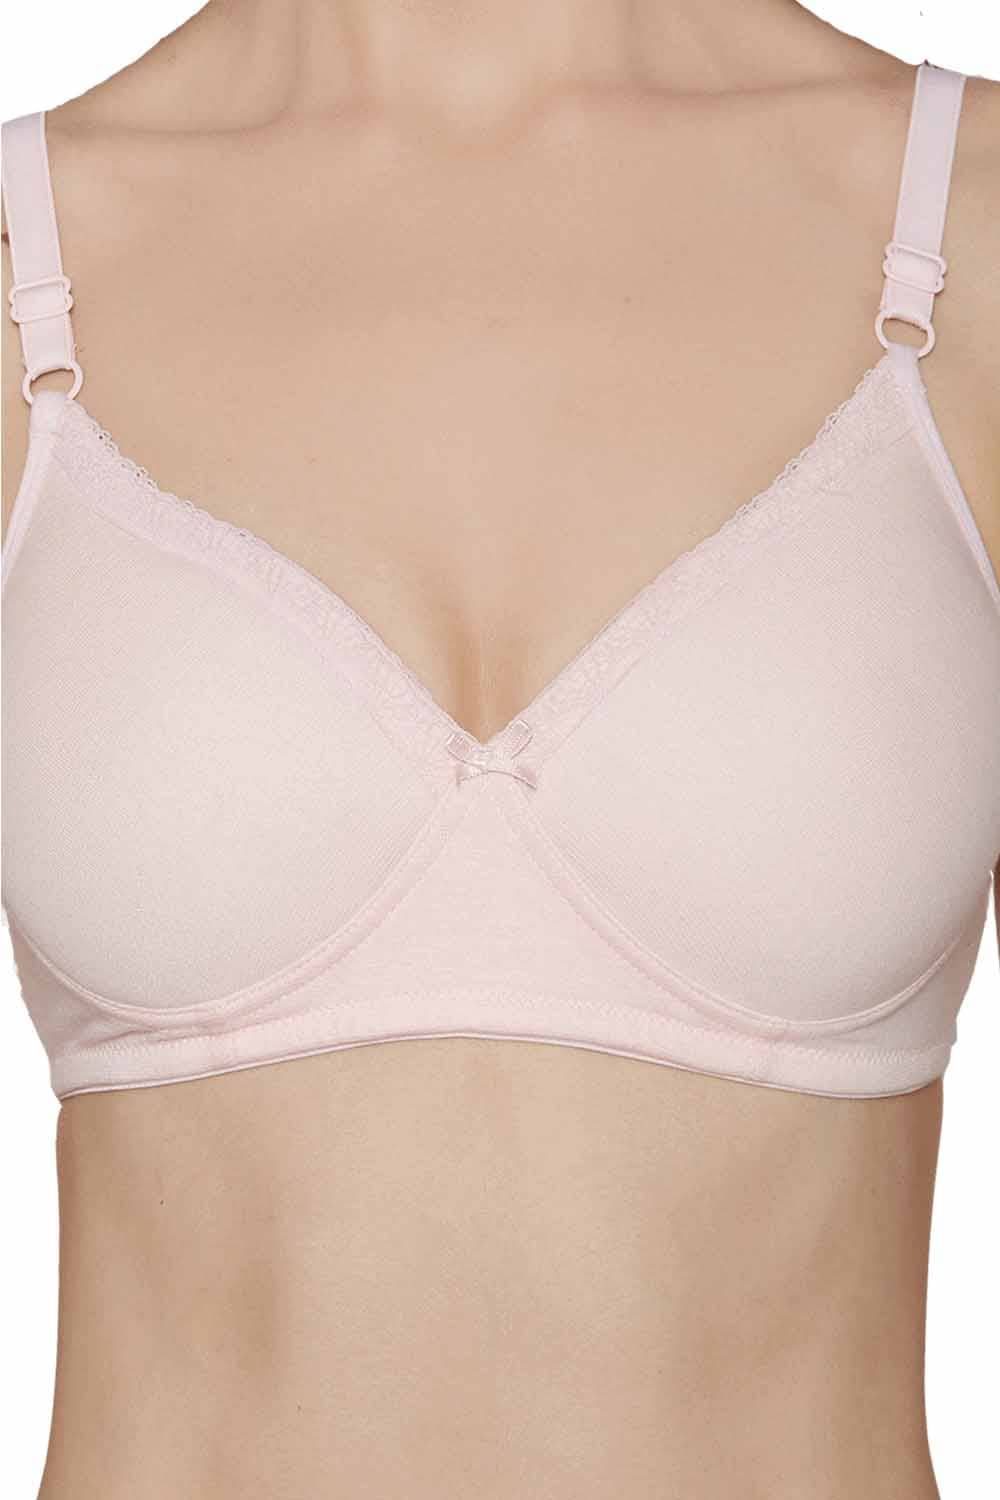 Organic Cotton  Antimicrobial Padded Non-wired Lace touch T-shirt Bra-ISB067-